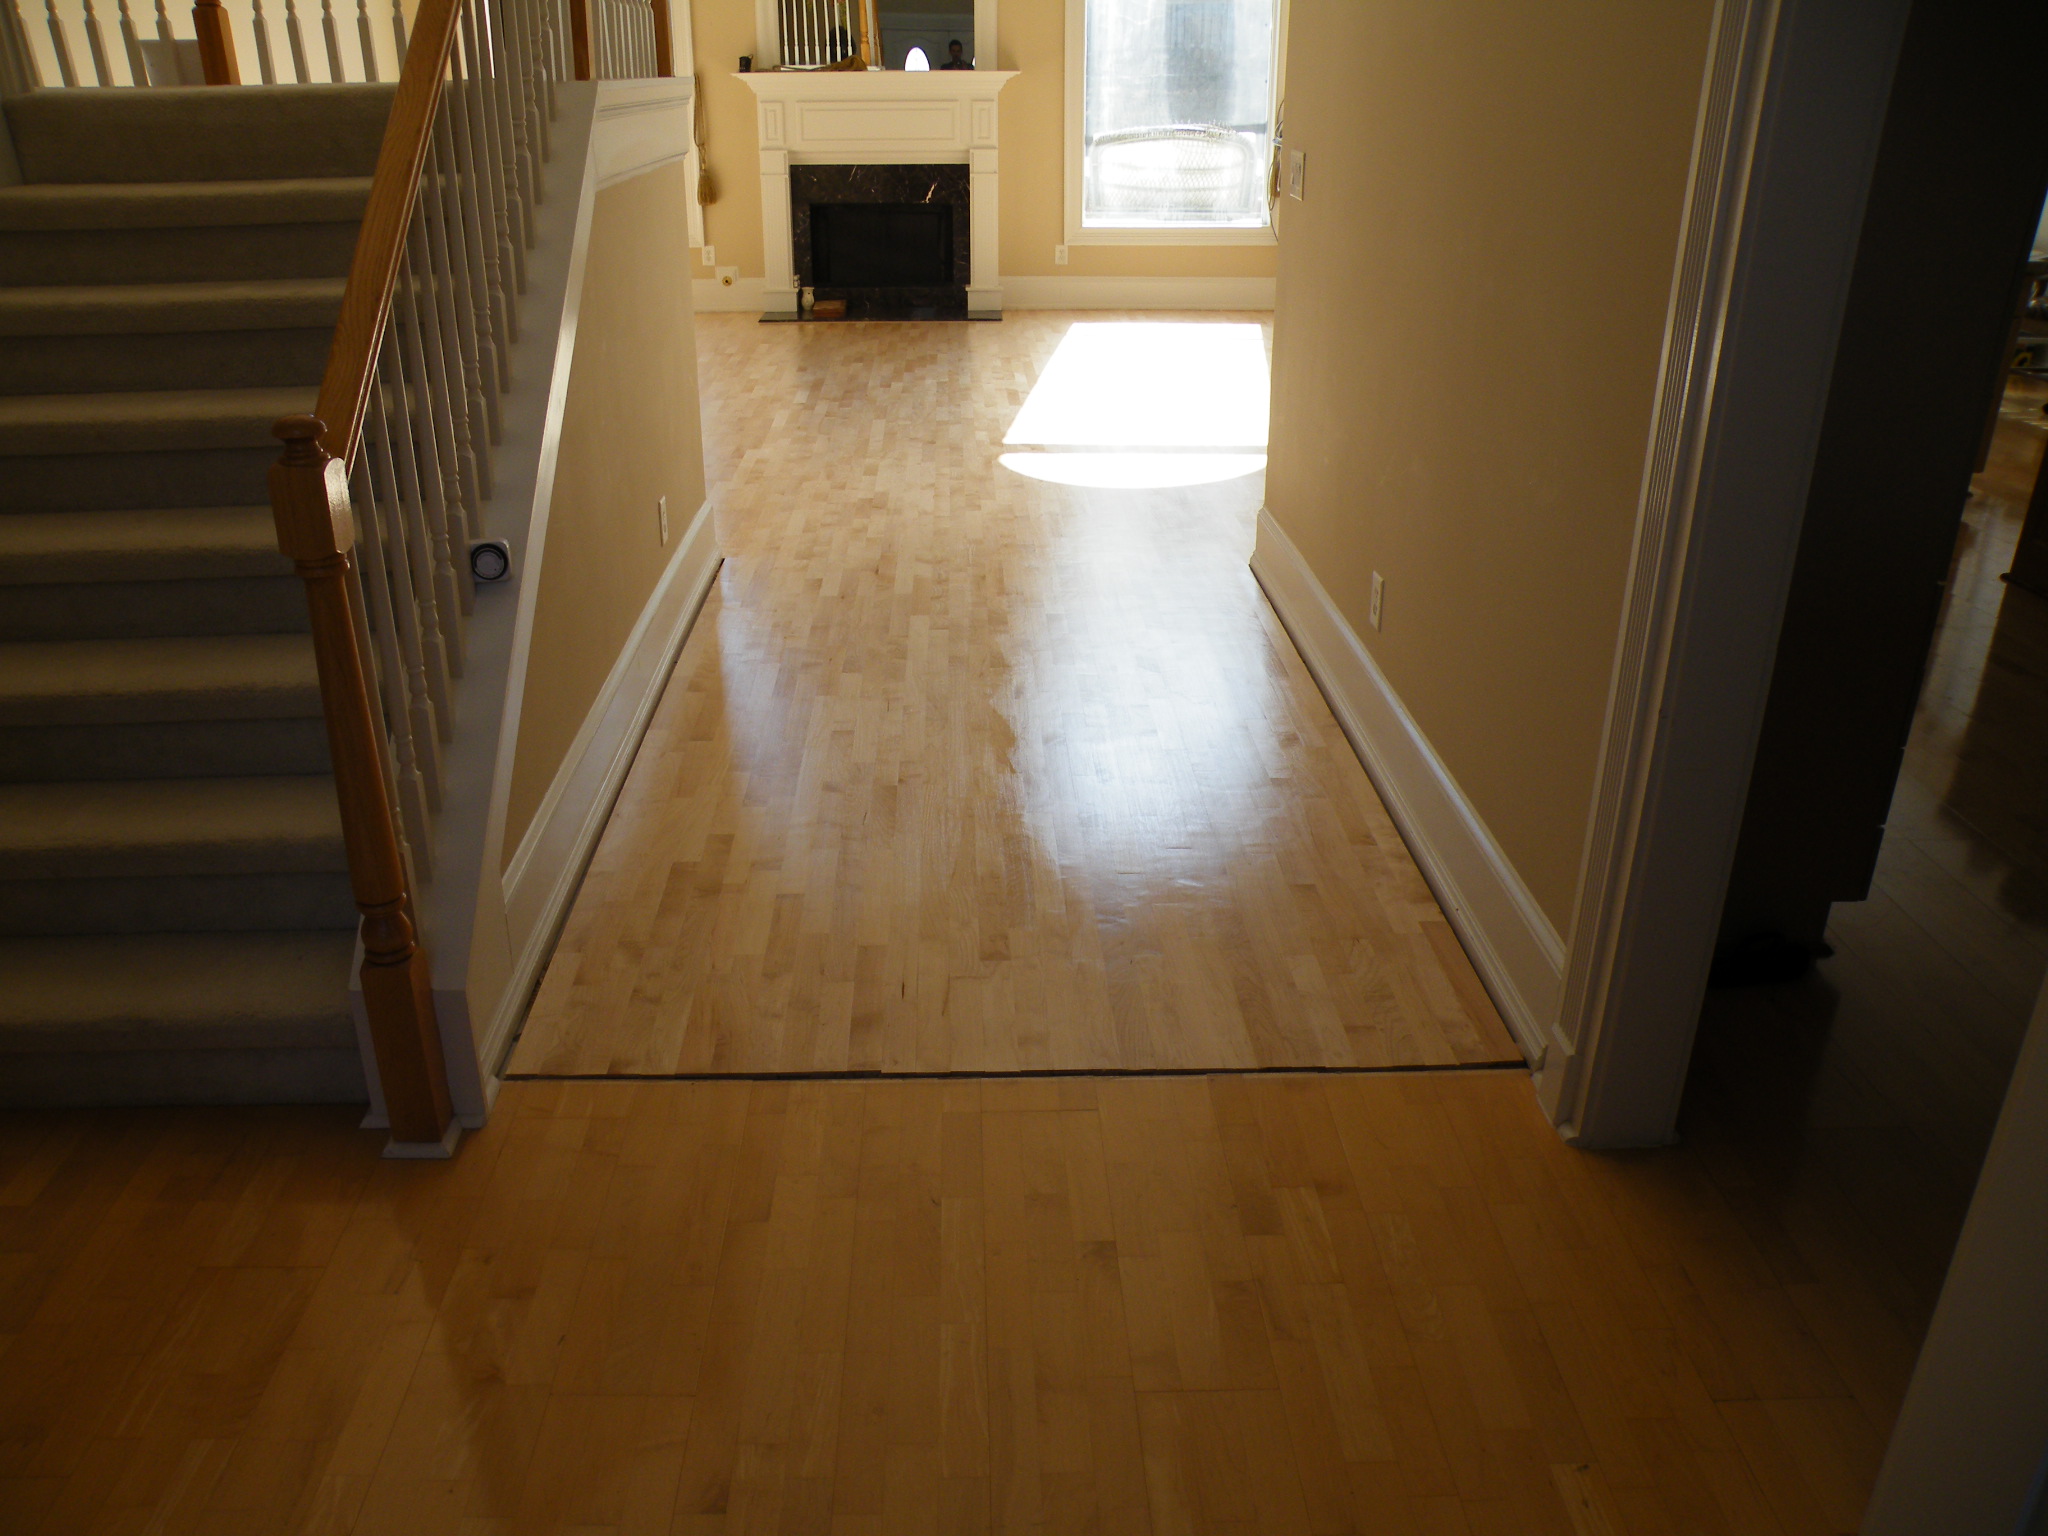 Hardwood floor installation and refinishing in Lawrenceville, GA - After